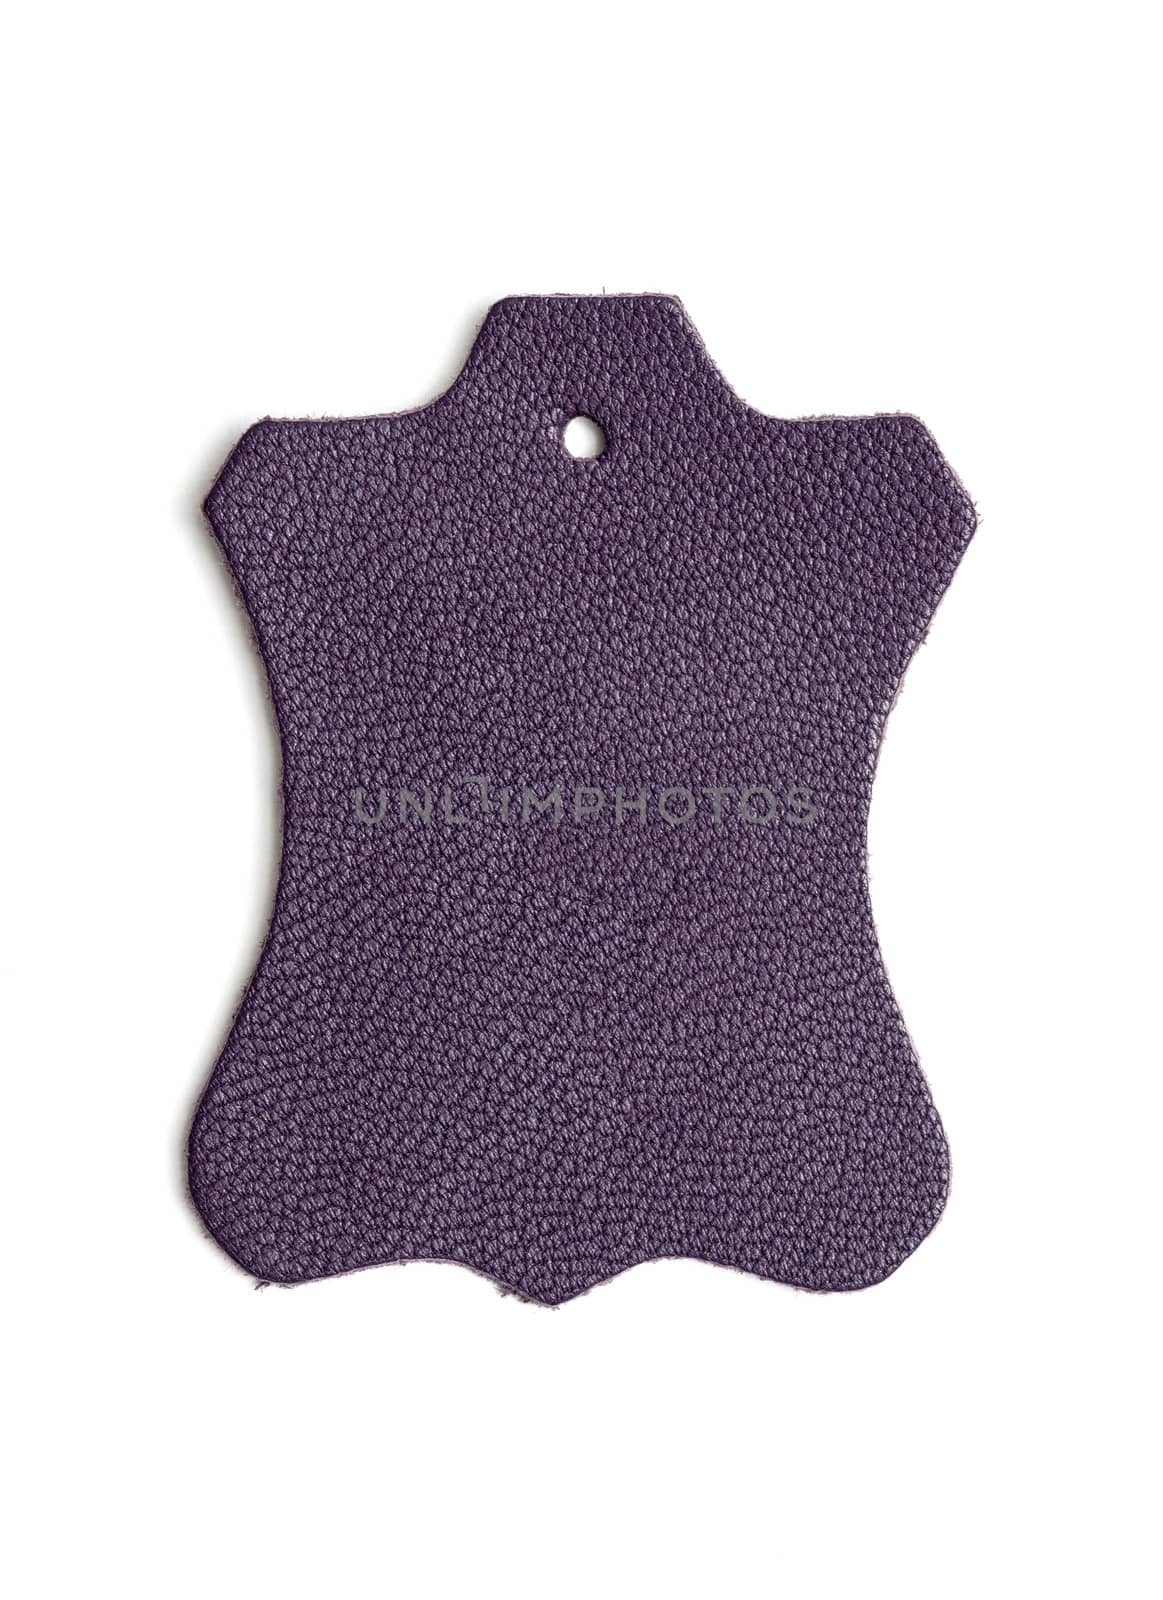 leather tags on white background